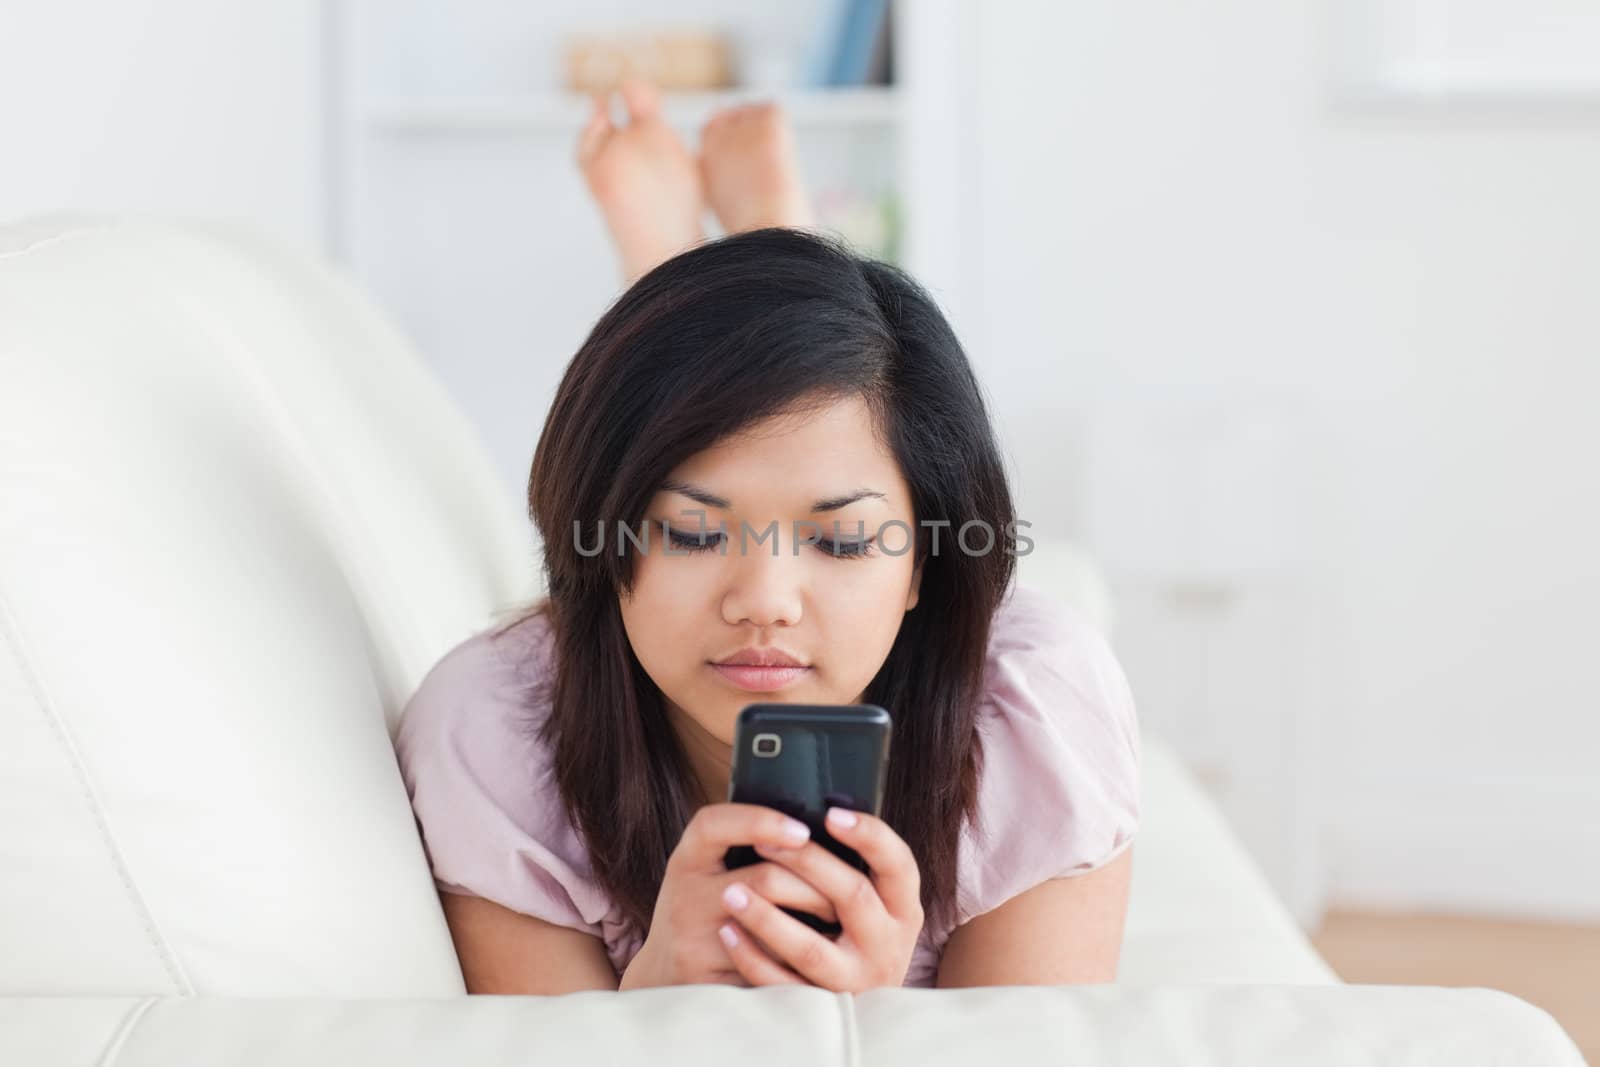 Woman lying on a sofa while holding a telephone in a living room